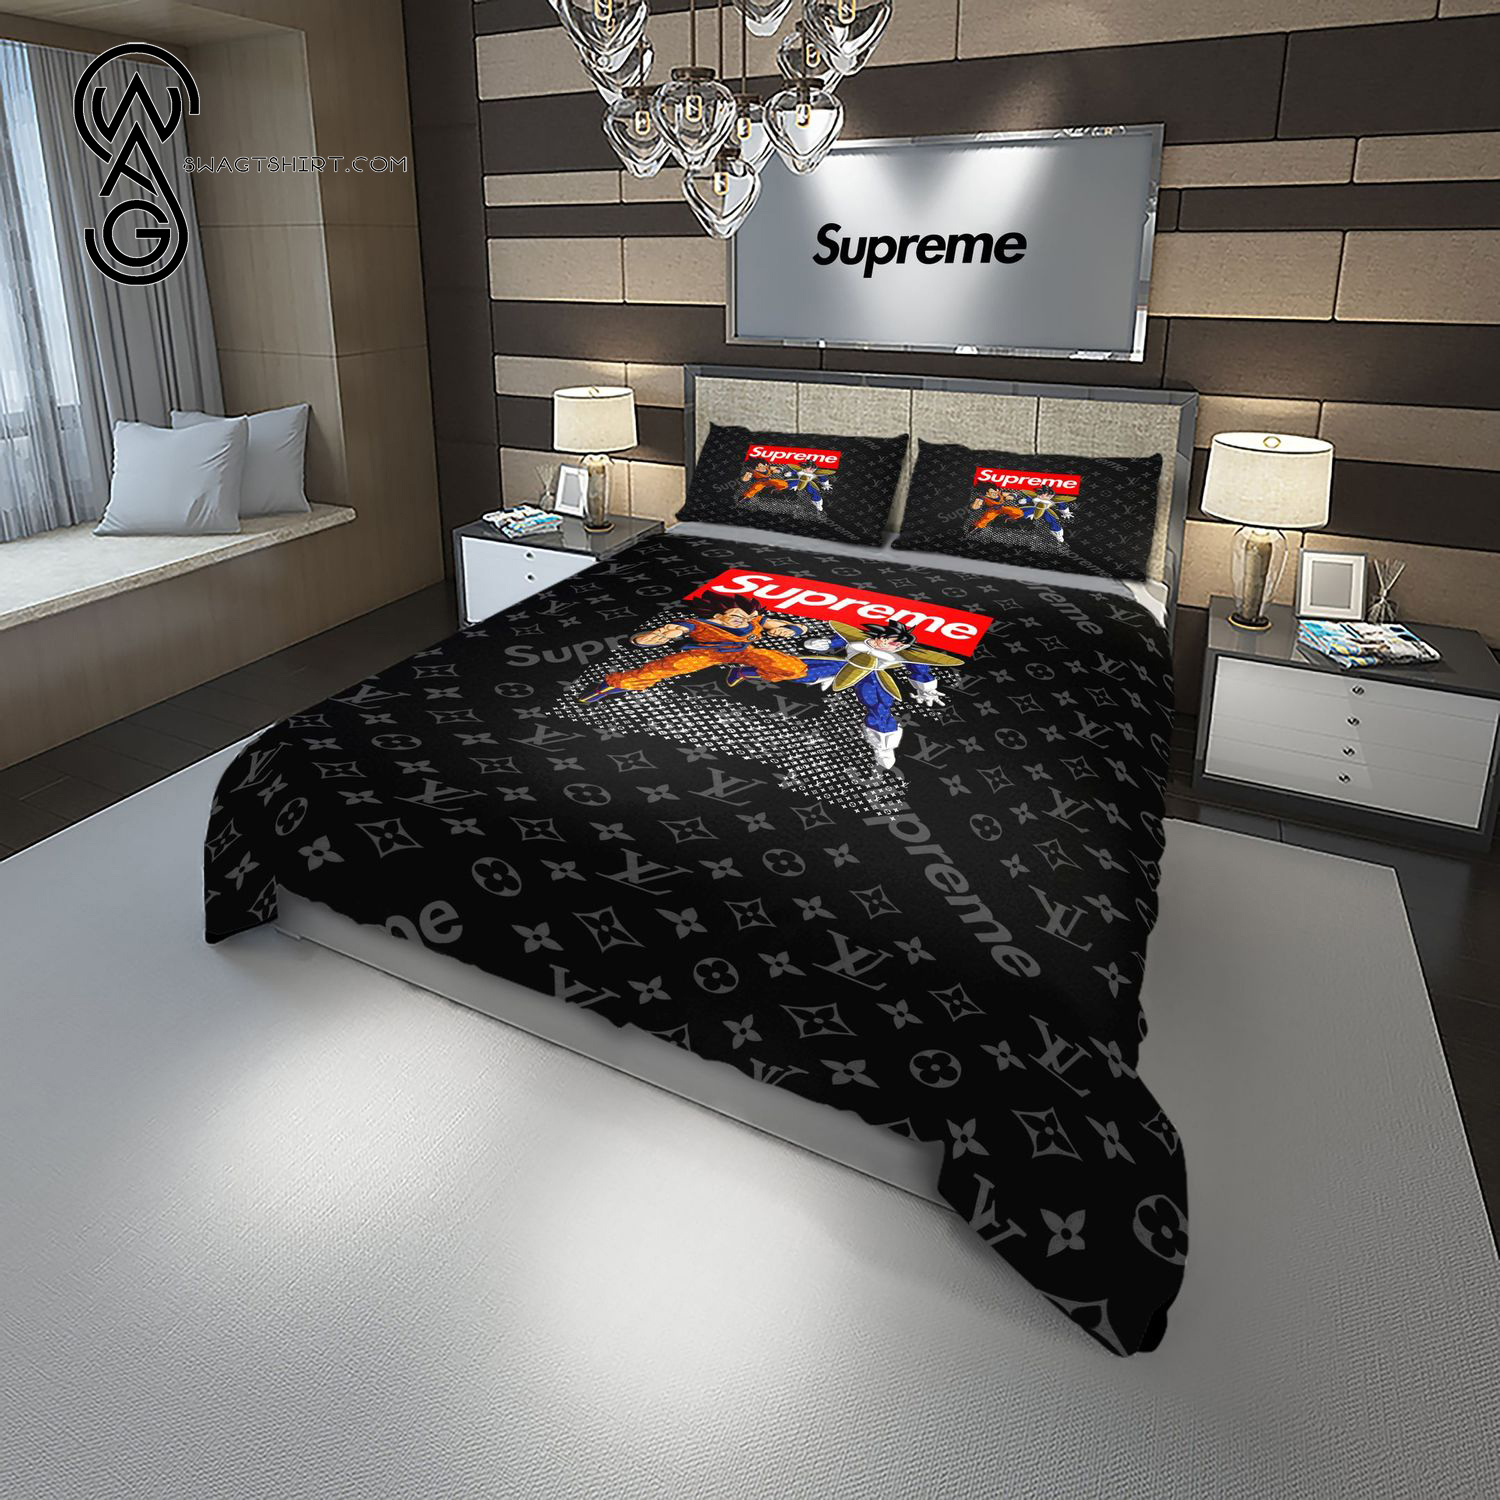 Supreme With Goku And Vegeta All Over Print Duvet Cover Bedroom Sets